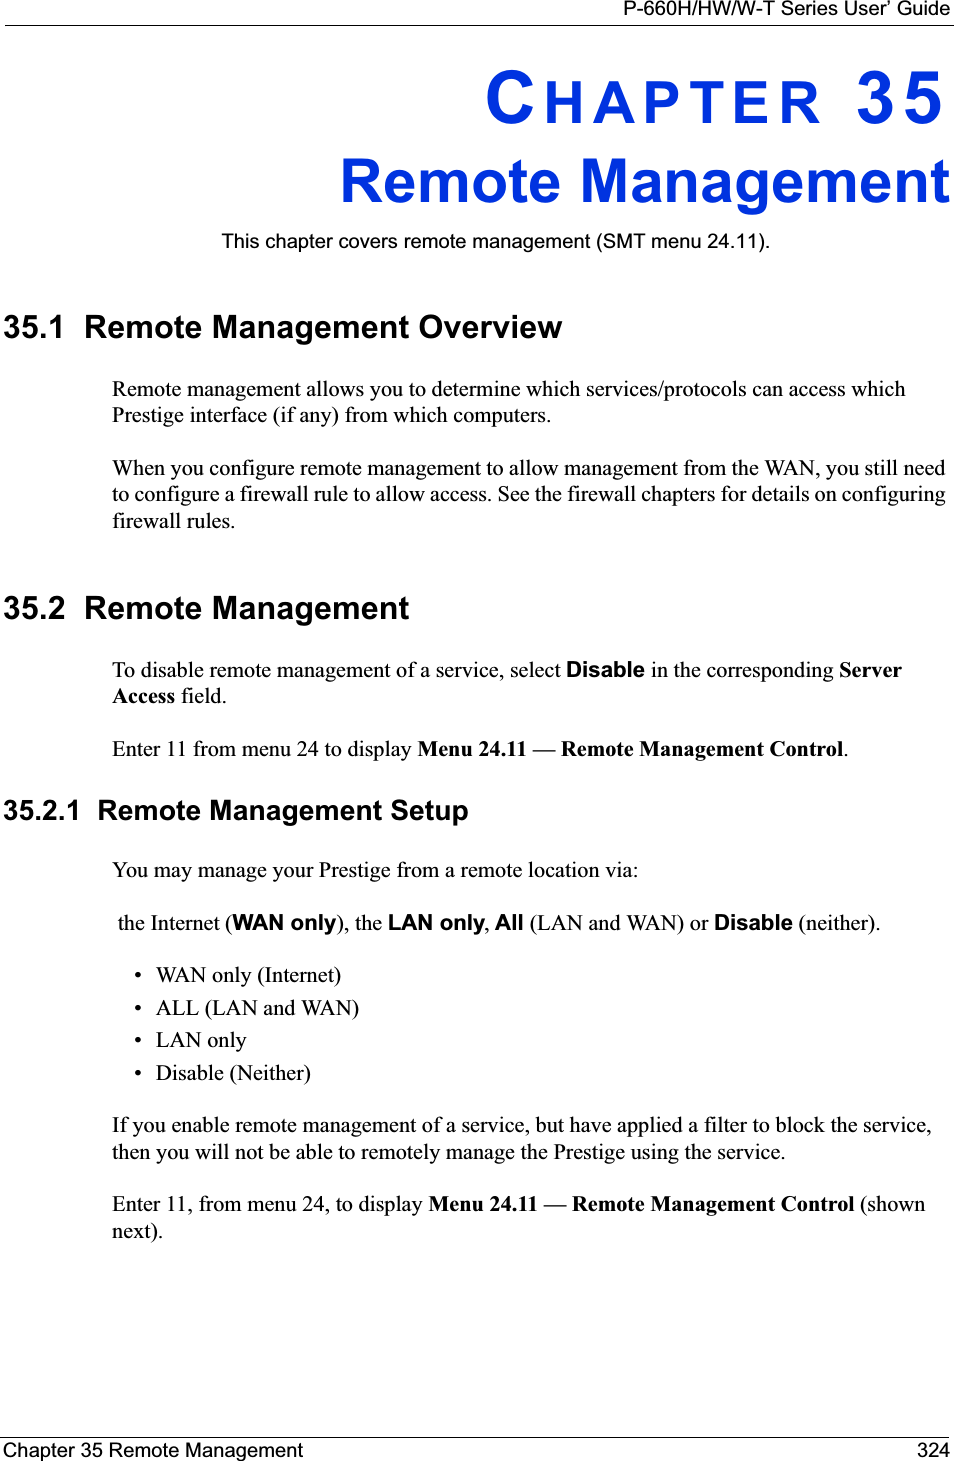 P-660H/HW/W-T Series User’ GuideChapter 35 Remote Management 324CHAPTER 35Remote ManagementThis chapter covers remote management (SMT menu 24.11).35.1  Remote Management OverviewRemote management allows you to determine which services/protocols can access which Prestige interface (if any) from which computers.When you configure remote management to allow management from the WAN, you still need to configure a firewall rule to allow access. See the firewall chapters for details on configuring firewall rules.35.2  Remote ManagementTo disable remote management of a service, select Disable in the corresponding Server Access field.Enter 11 from menu 24 to display Menu 24.11 — Remote Management Control.35.2.1  Remote Management SetupYou may manage your Prestige from a remote location via: the Internet (WAN only), the LAN only,All (LAN and WAN) or Disable (neither).• WAN only (Internet)• ALL (LAN and WAN)• LAN only• Disable (Neither)If you enable remote management of a service, but have applied a filter to block the service, then you will not be able to remotely manage the Prestige using the service.Enter 11, from menu 24, to display Menu 24.11 — Remote Management Control (shownnext). 